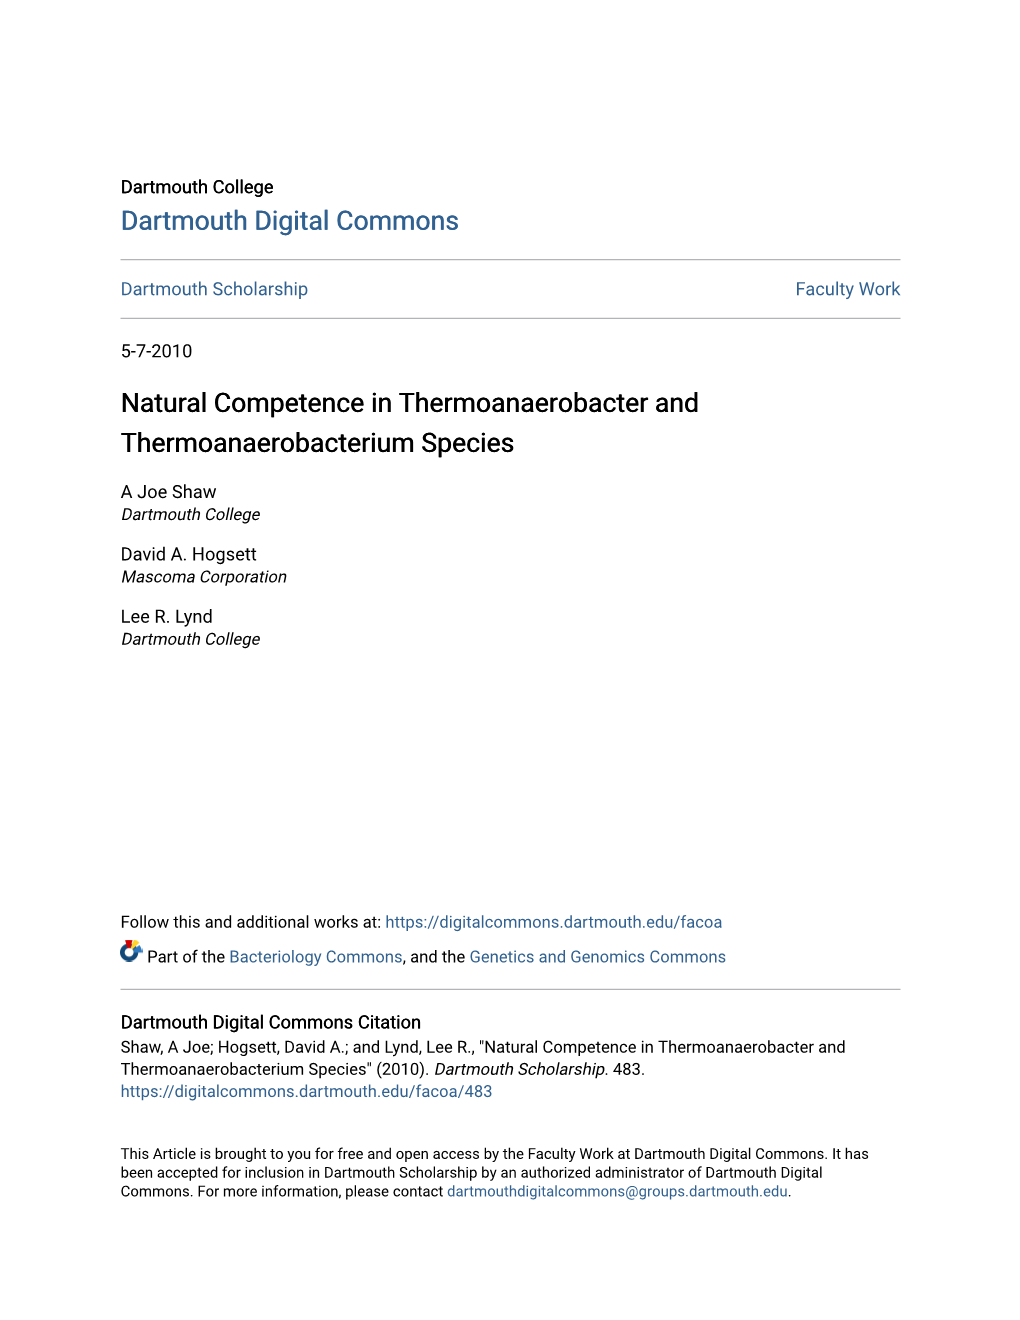 Natural Competence in Thermoanaerobacter and Thermoanaerobacterium Species